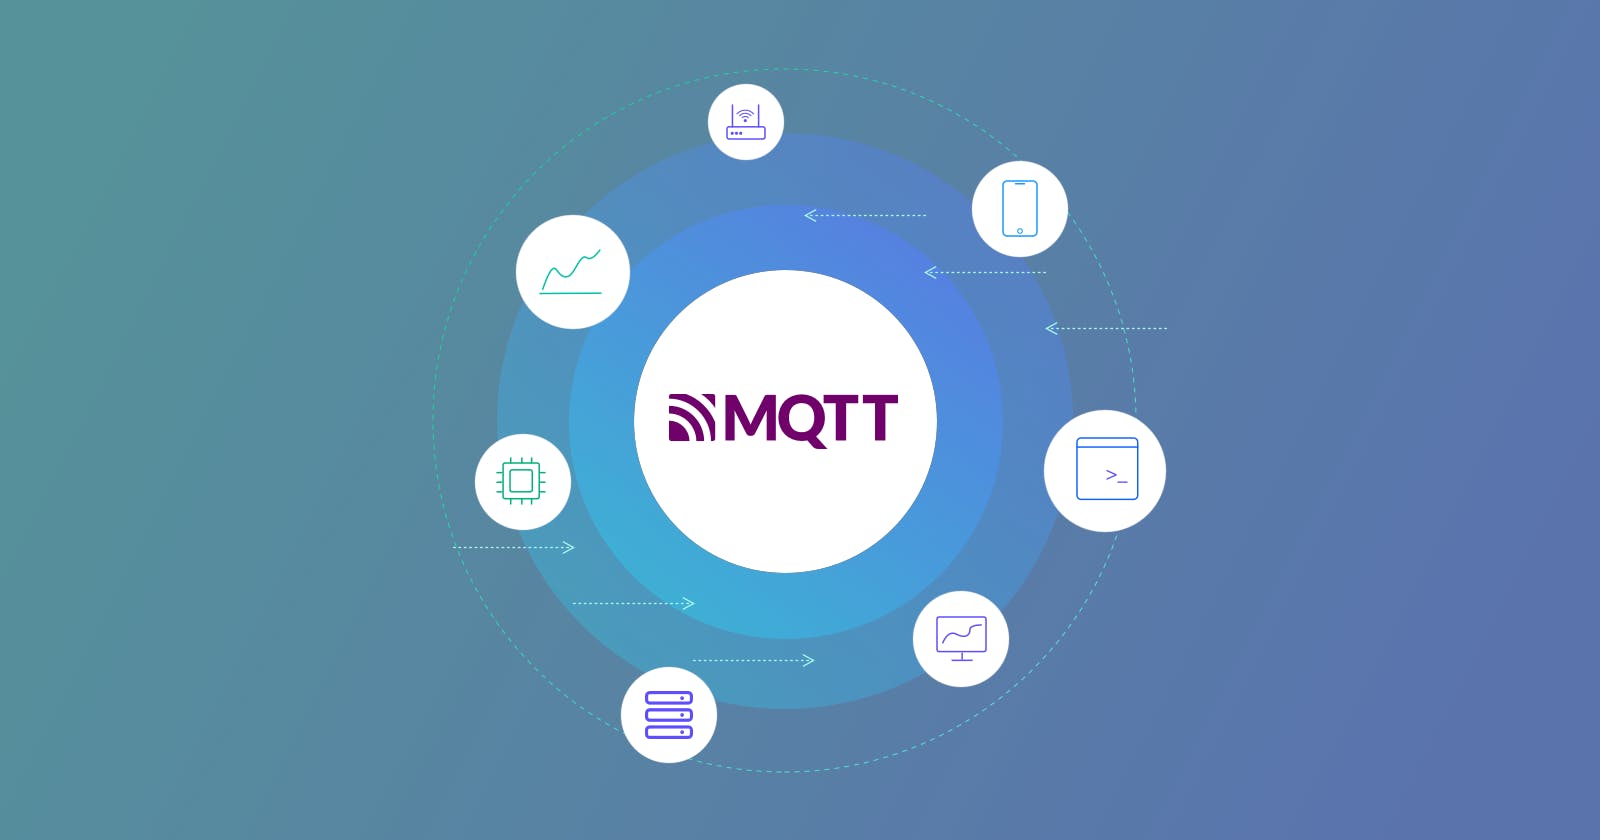 7 Best MQTT Client Tools Worth Trying in 2022